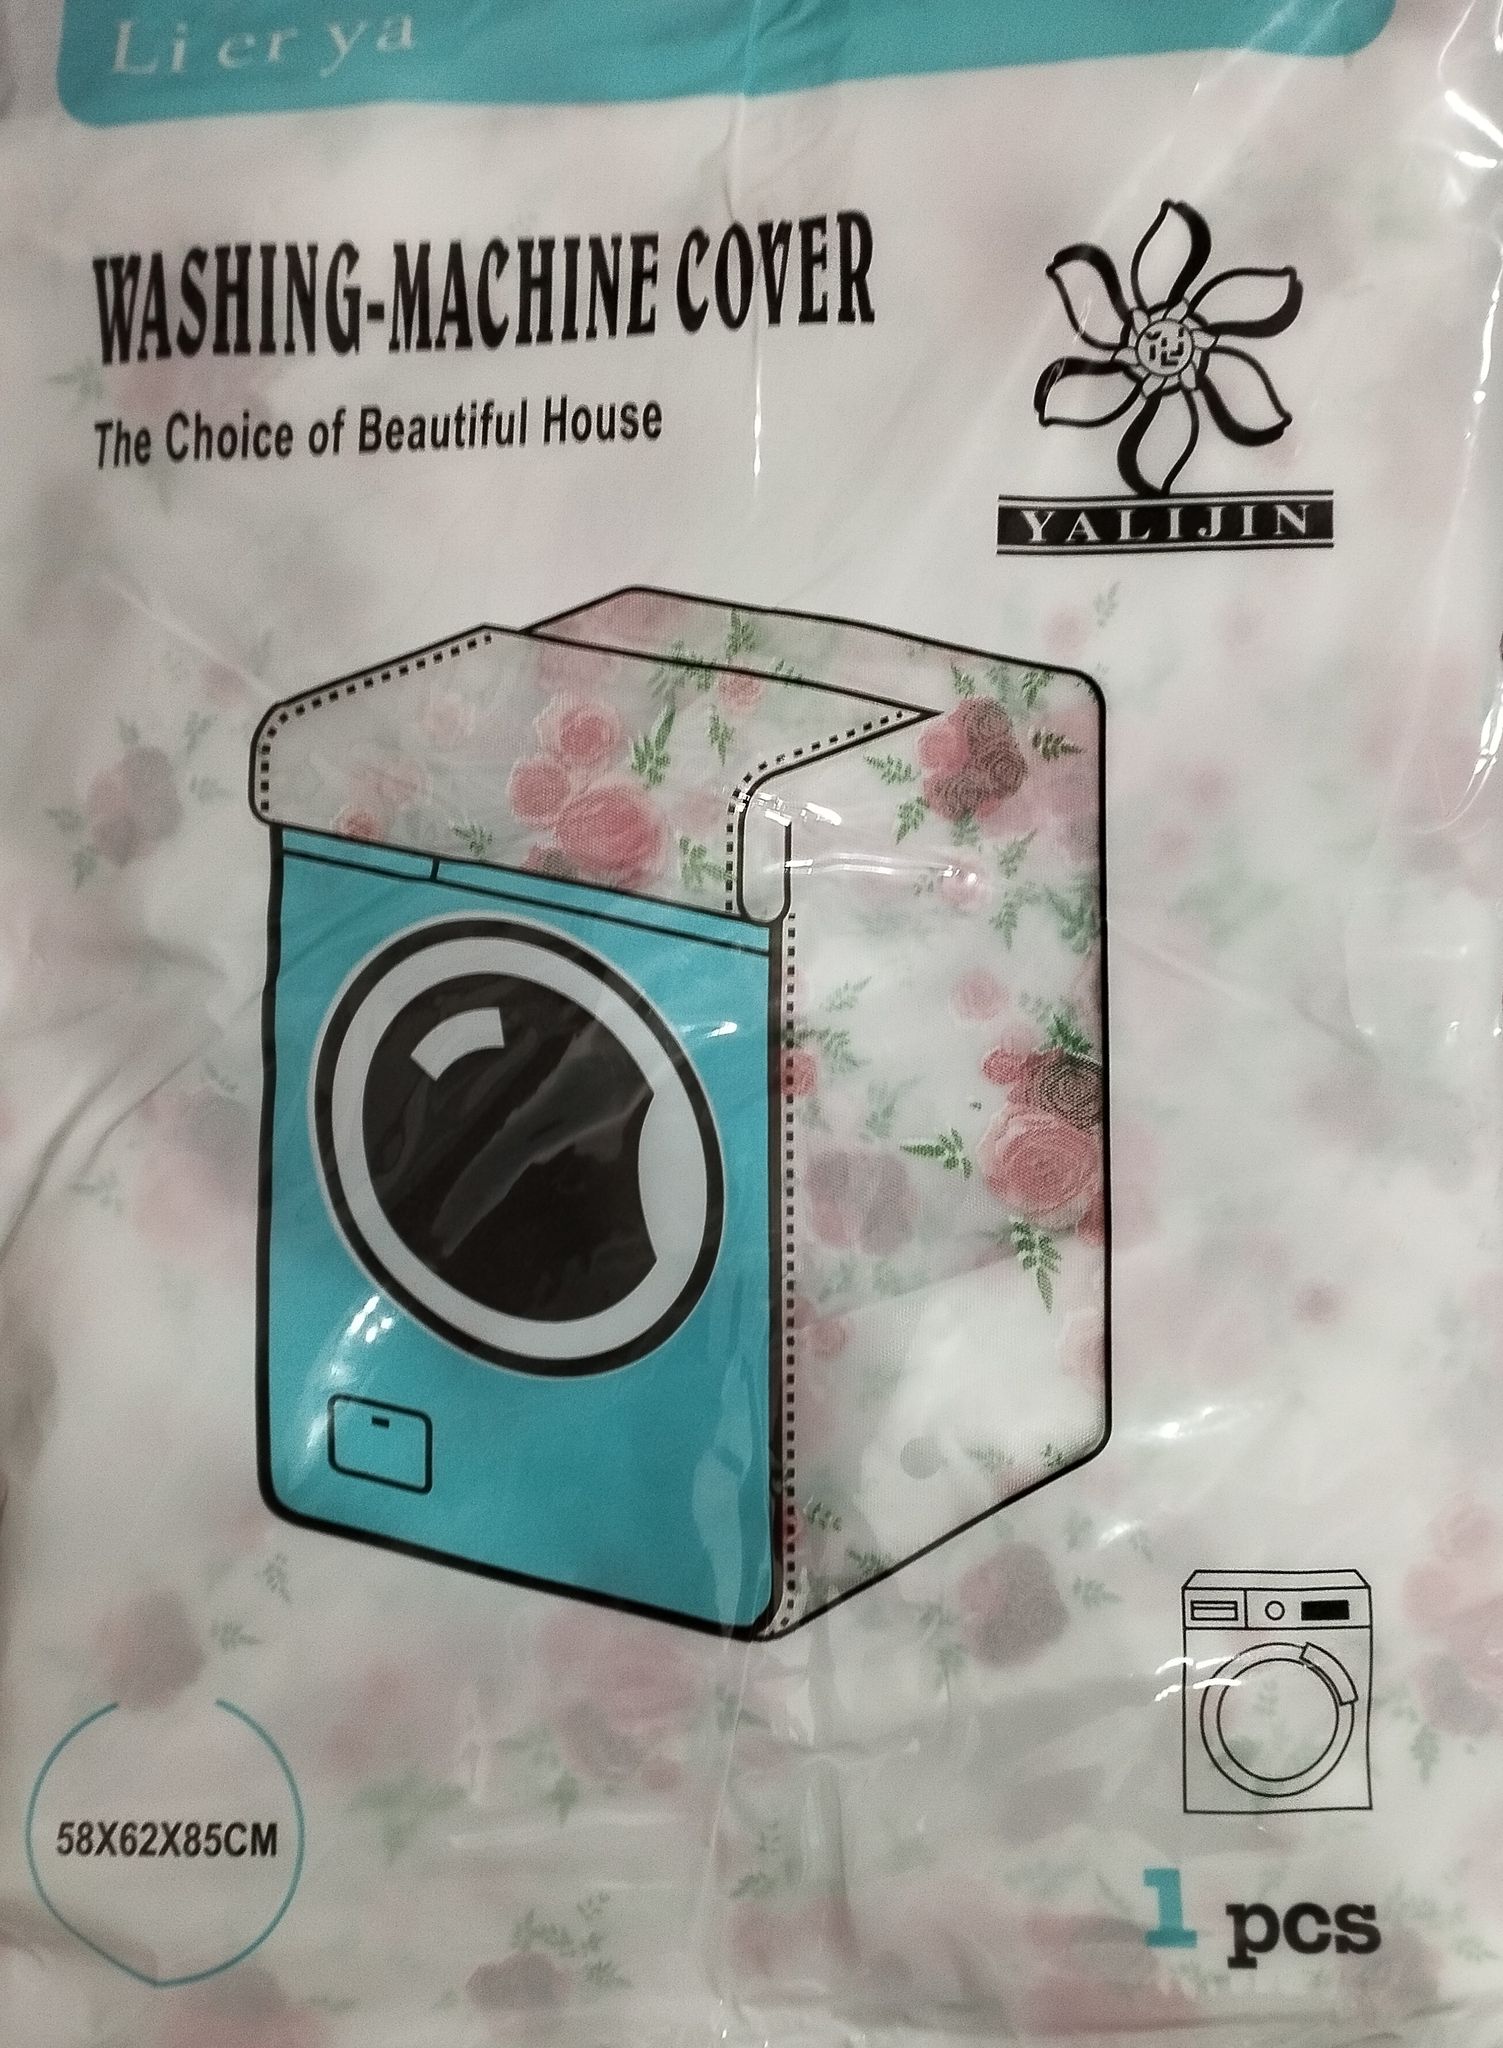 "NAARI VILLA" Washing Machine Cover Suitable for front Loaded of any size multicolour printed on Semi-Transparent PVC zipper Best Imported Quality (Colour and print according to availability and stock)